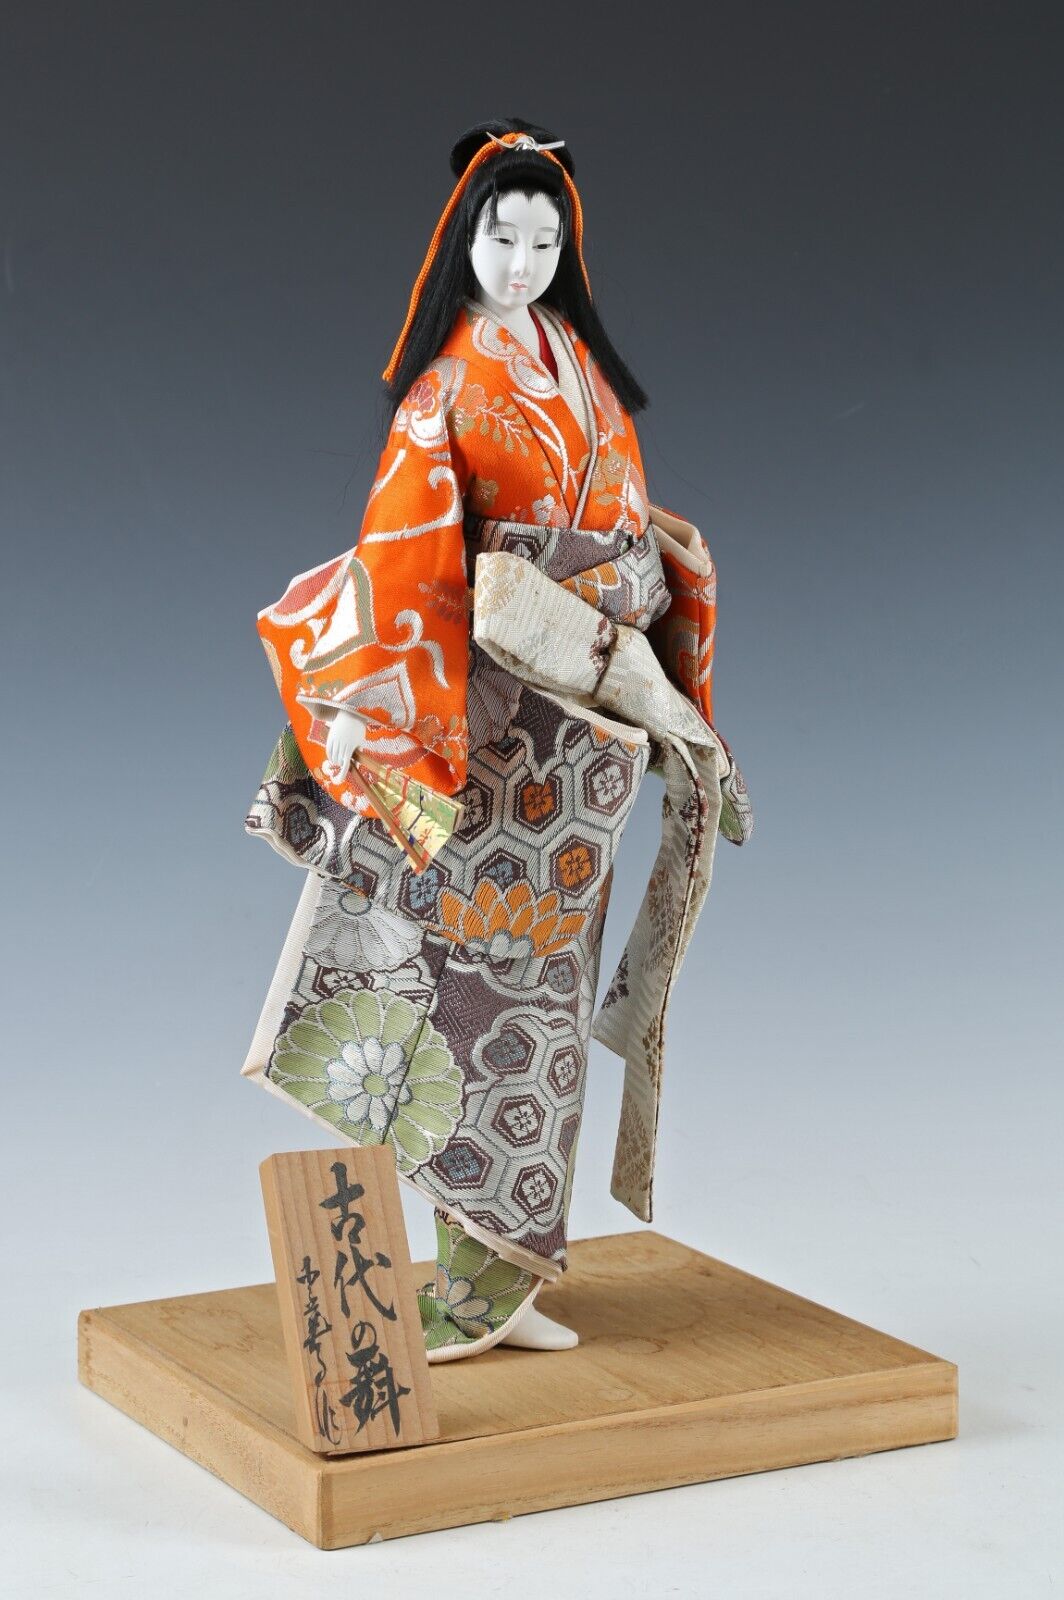 Cute Japanese Vintage Geisha Doll in Traditional Kimono Clothing Ethic Asian Art Collectible Decor.